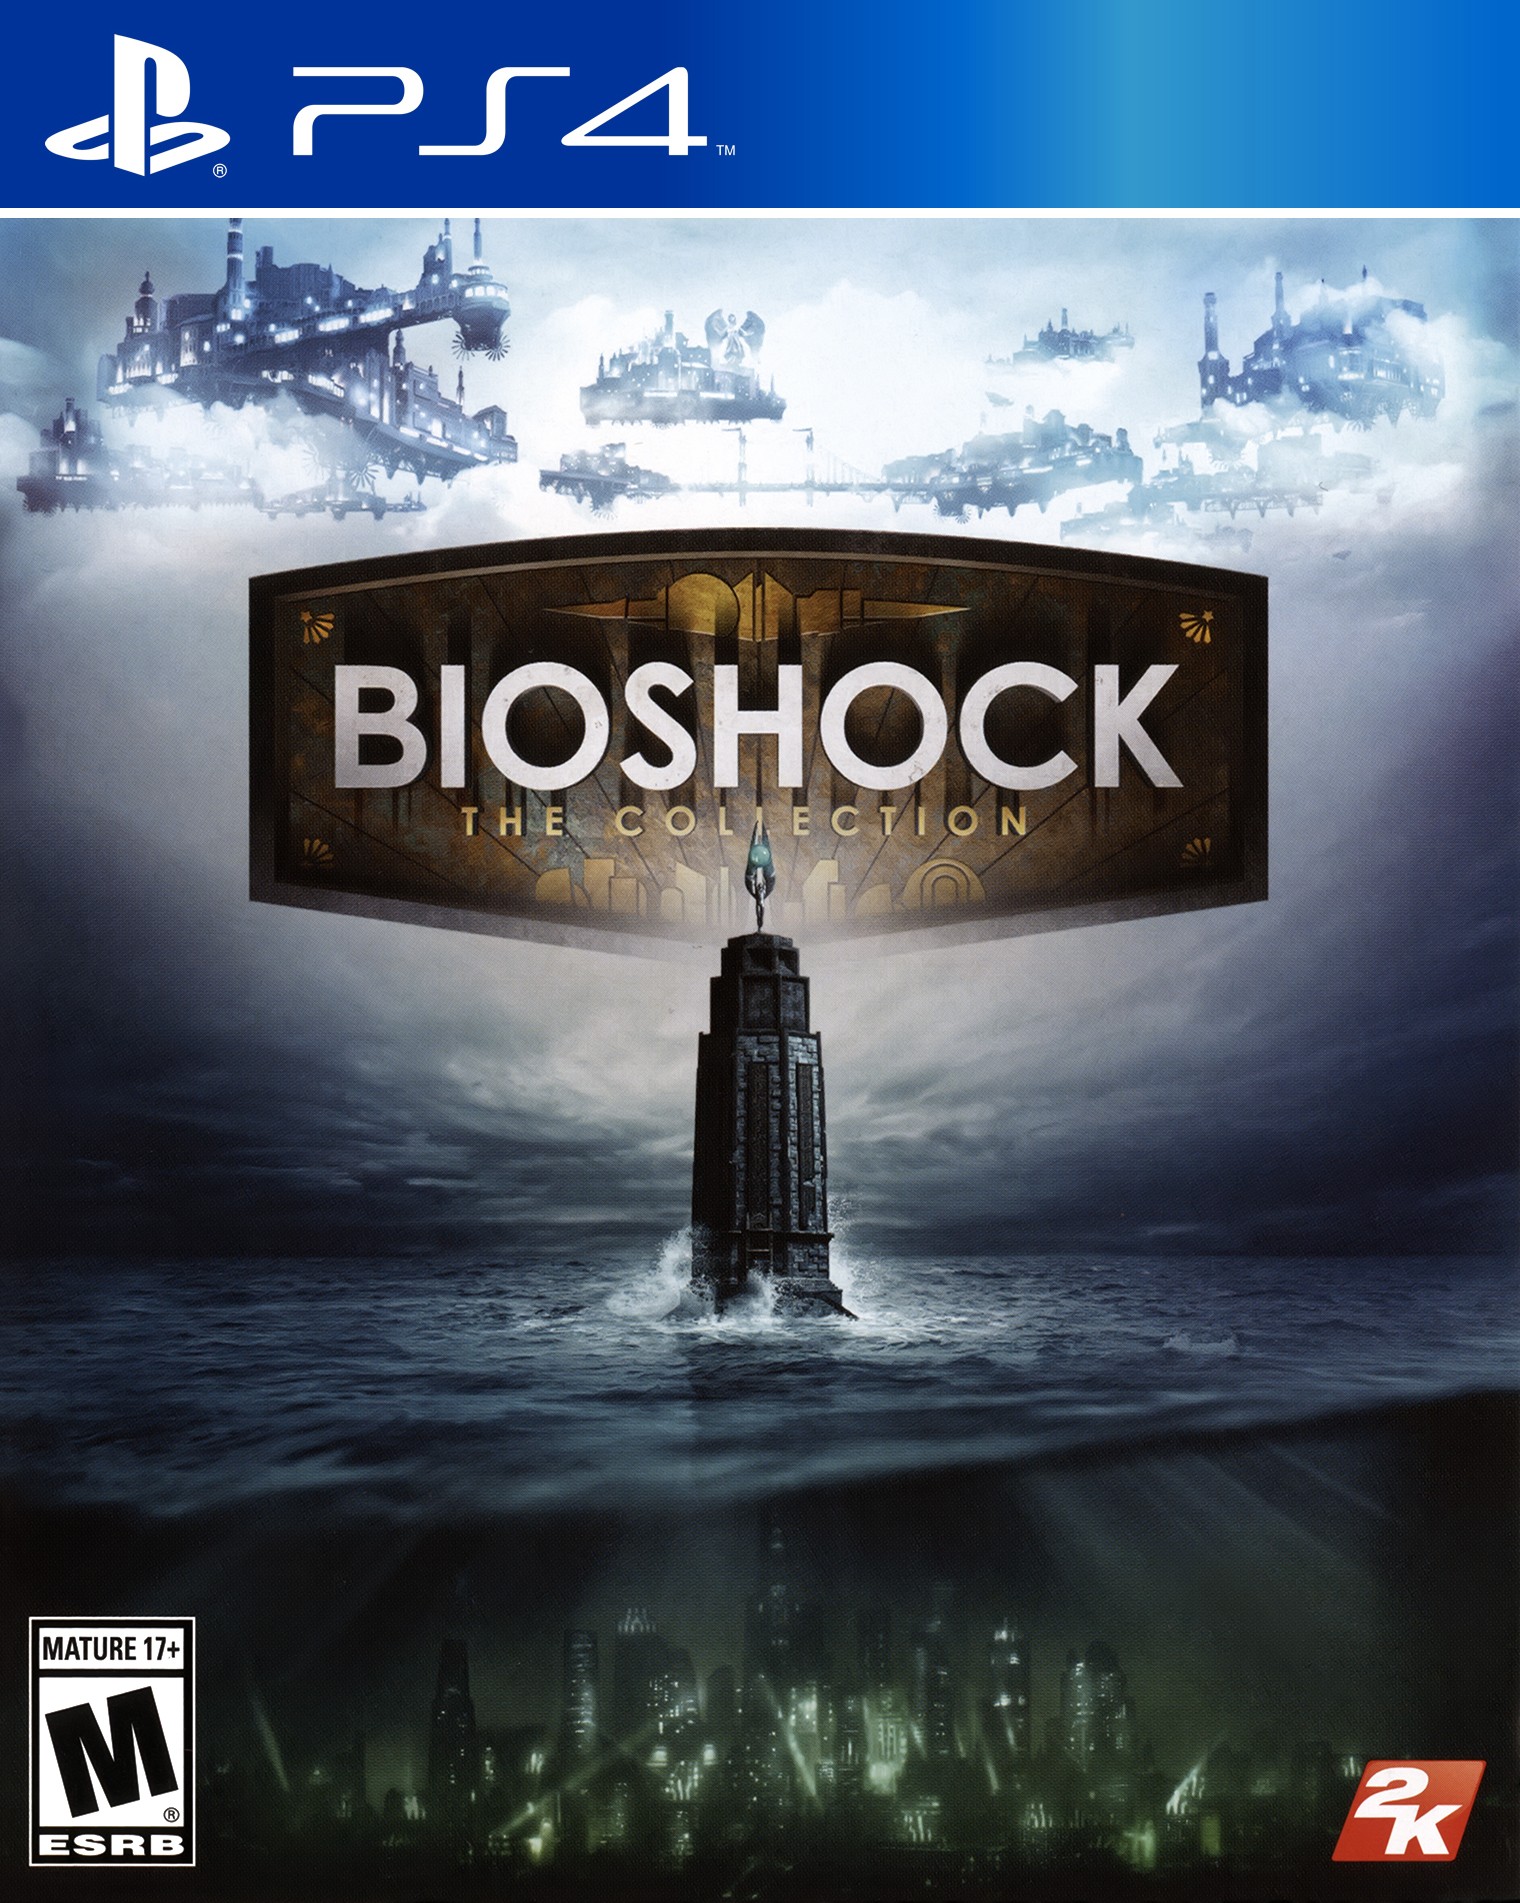 'Bioshock: The Collection'